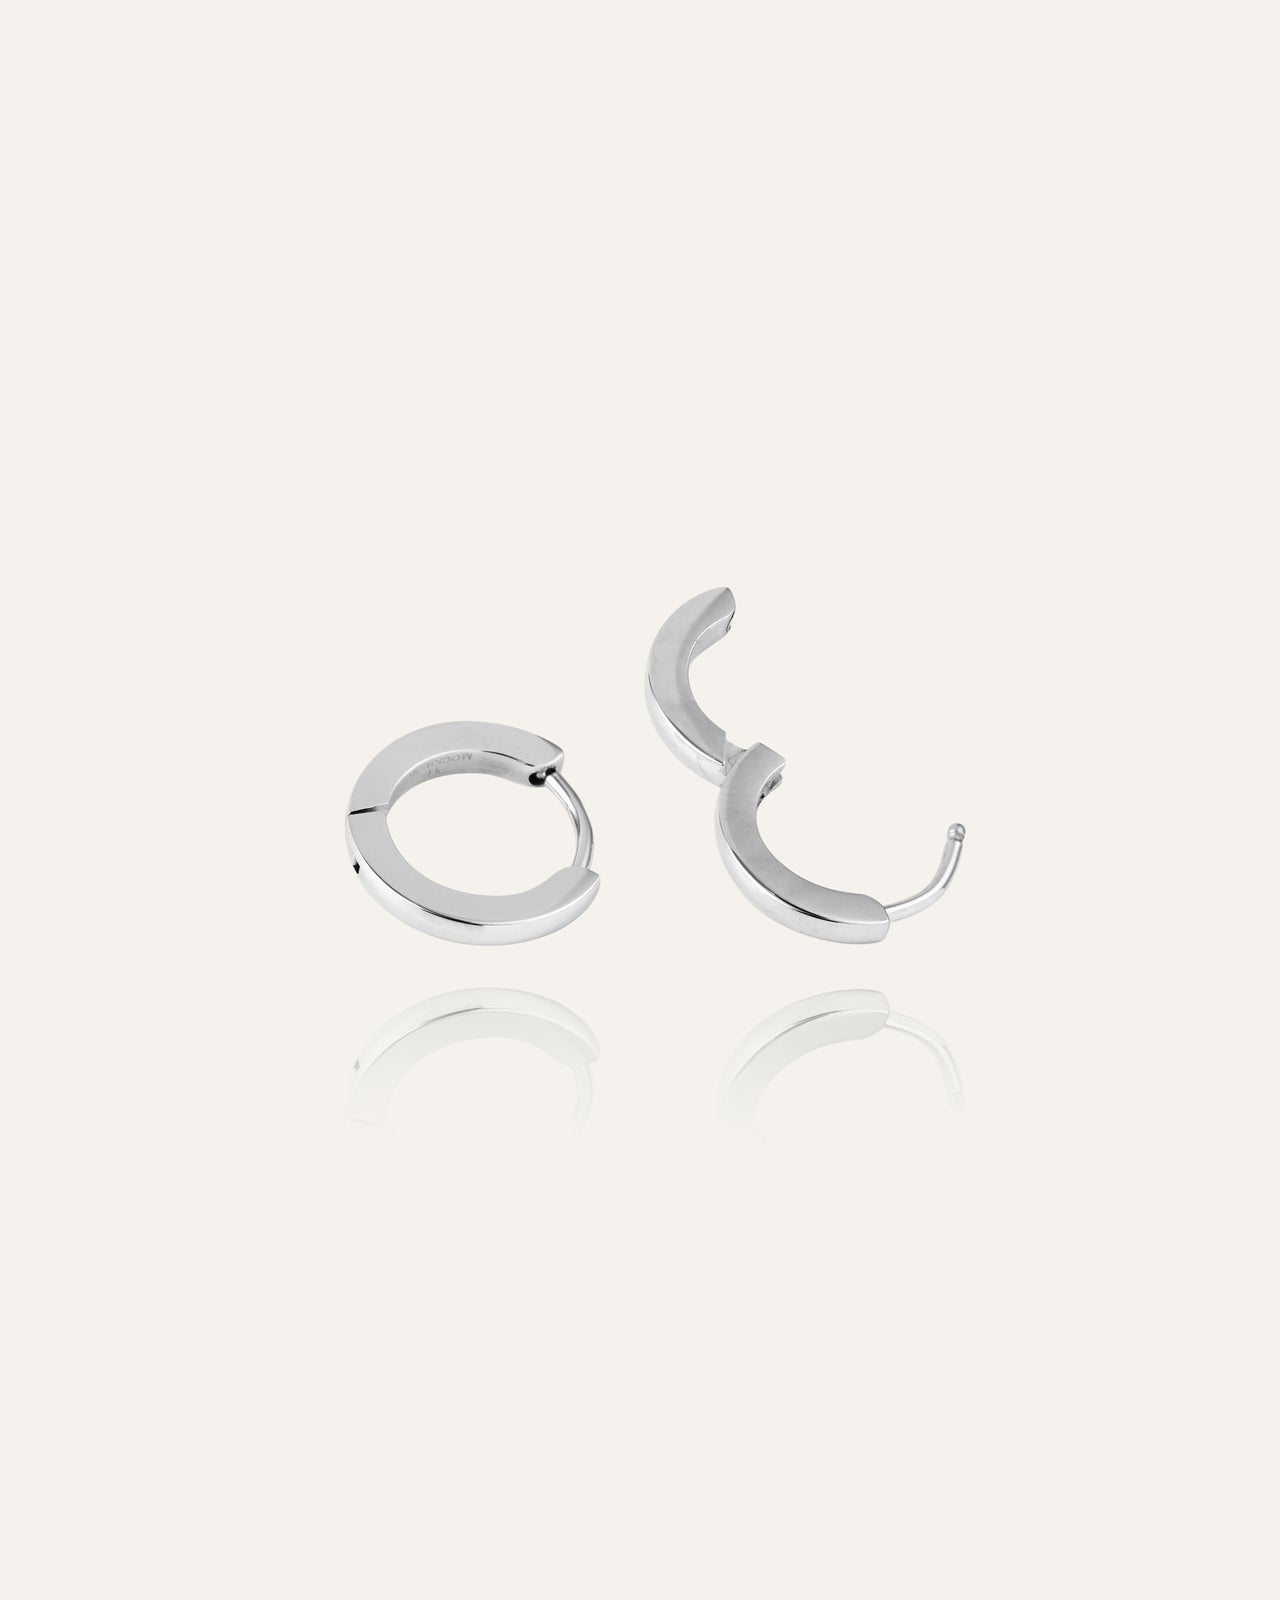 Classic Silver Hoops Small